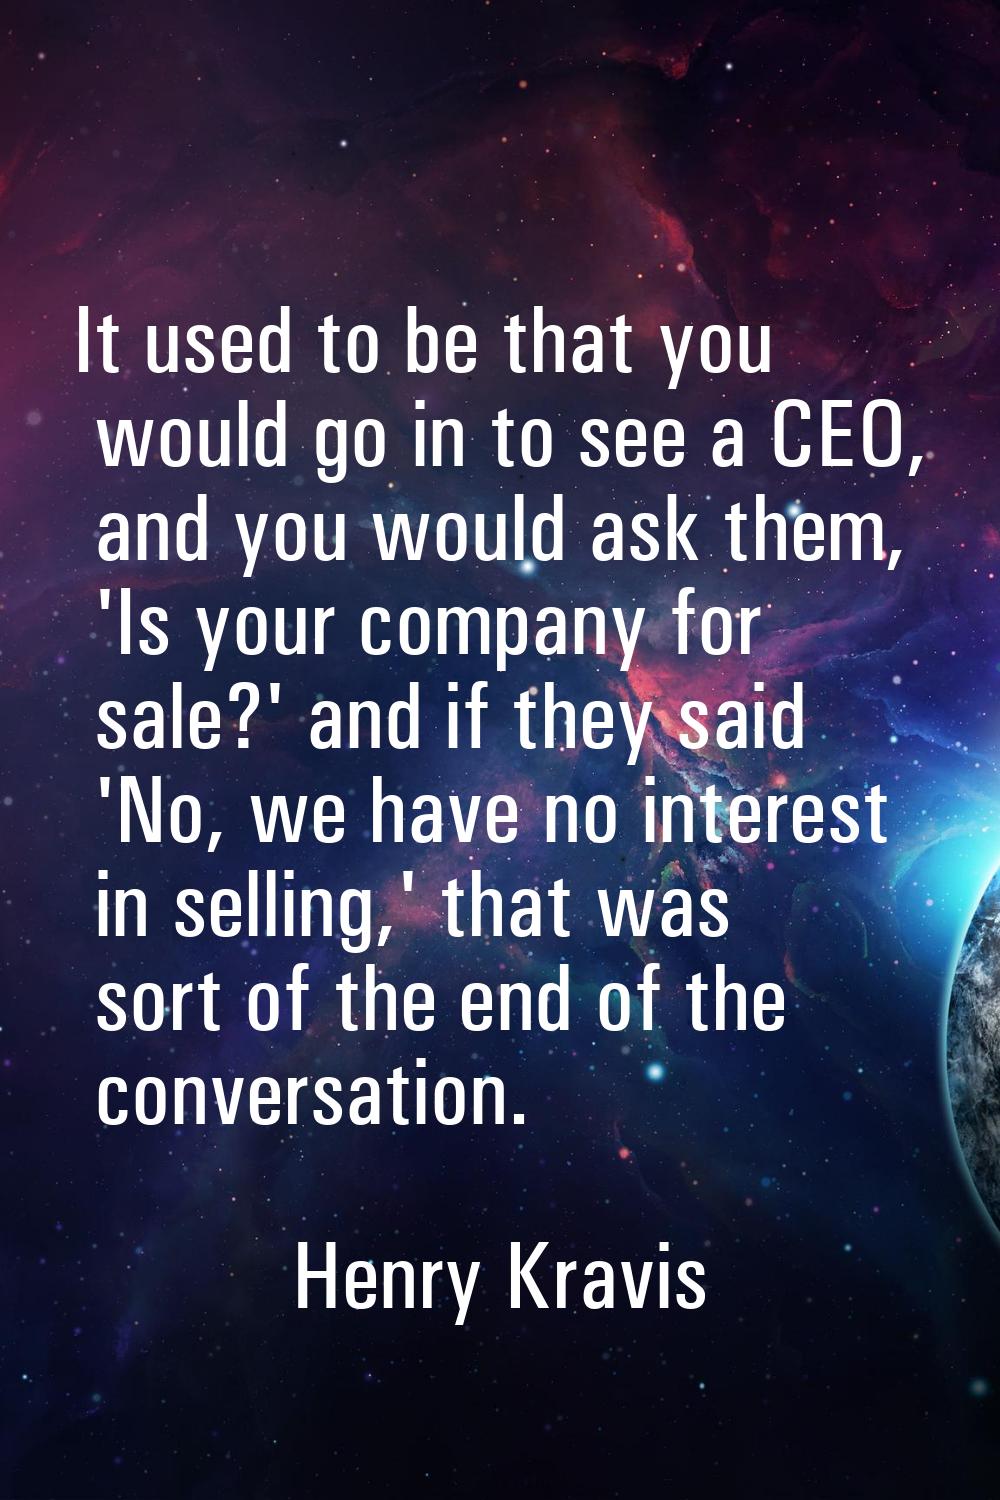 It used to be that you would go in to see a CEO, and you would ask them, 'Is your company for sale?